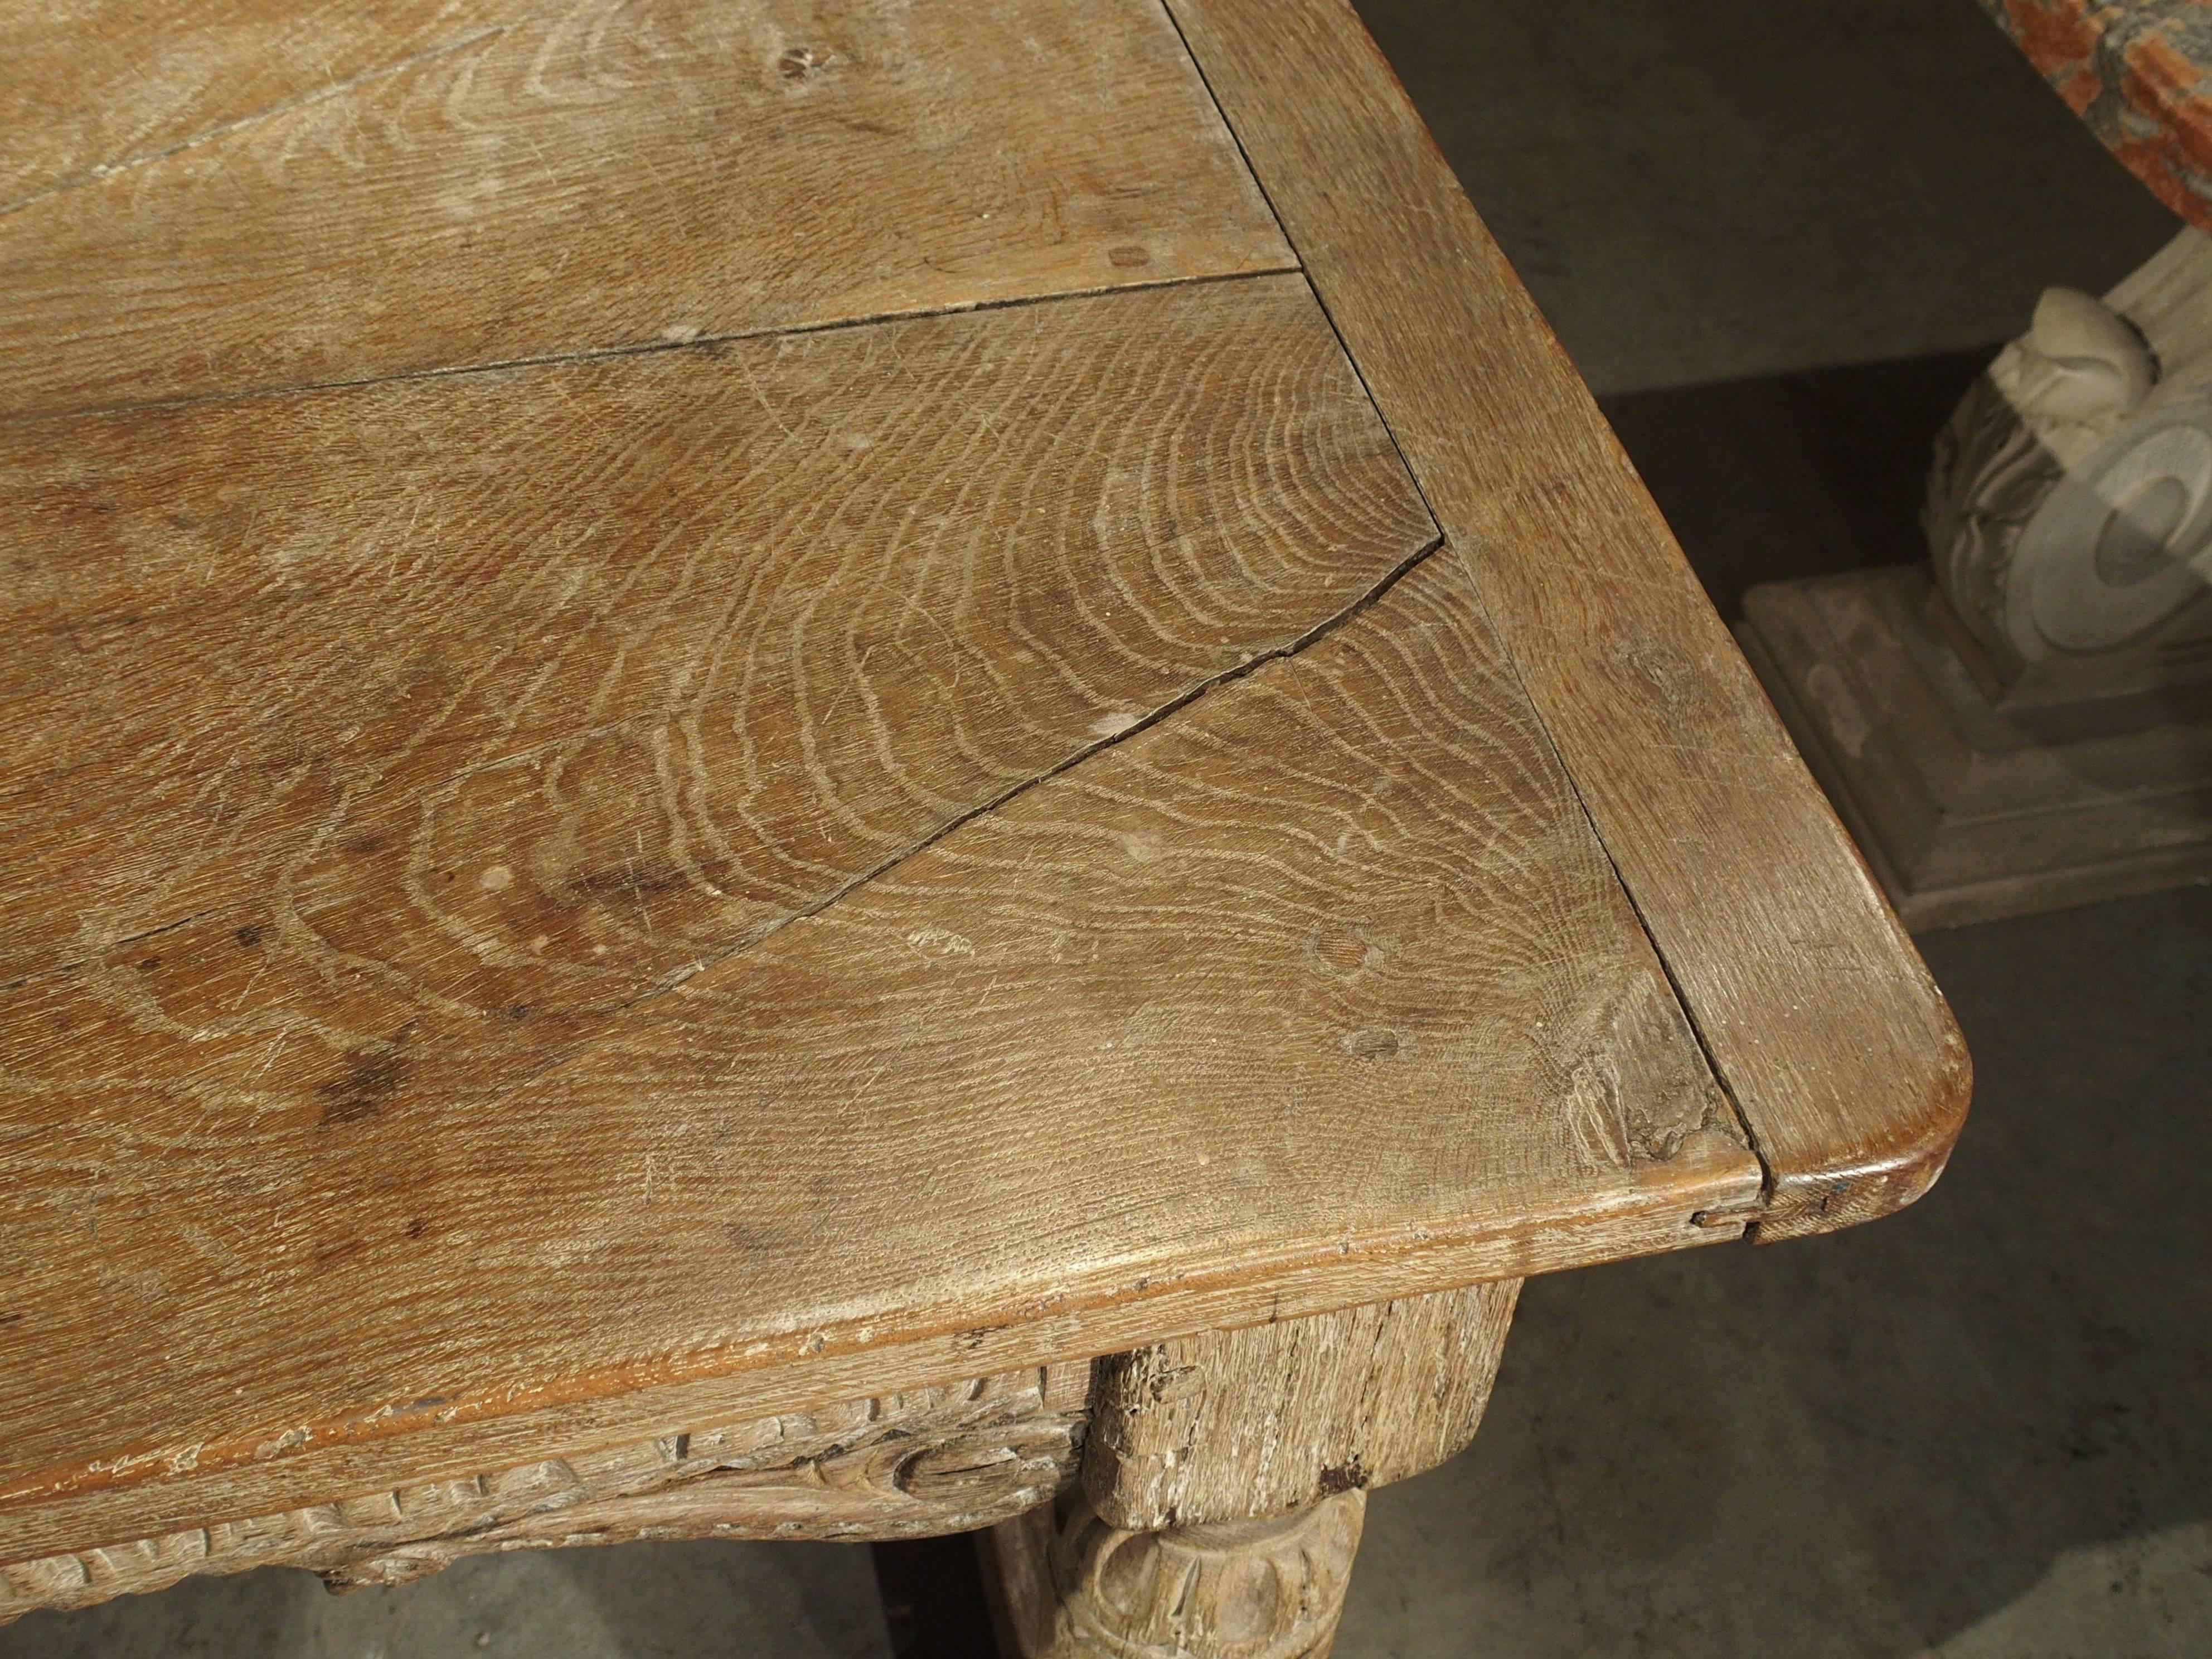 Great Britain (UK) Antique Whitewashed Oak Table from England, Early 1800s